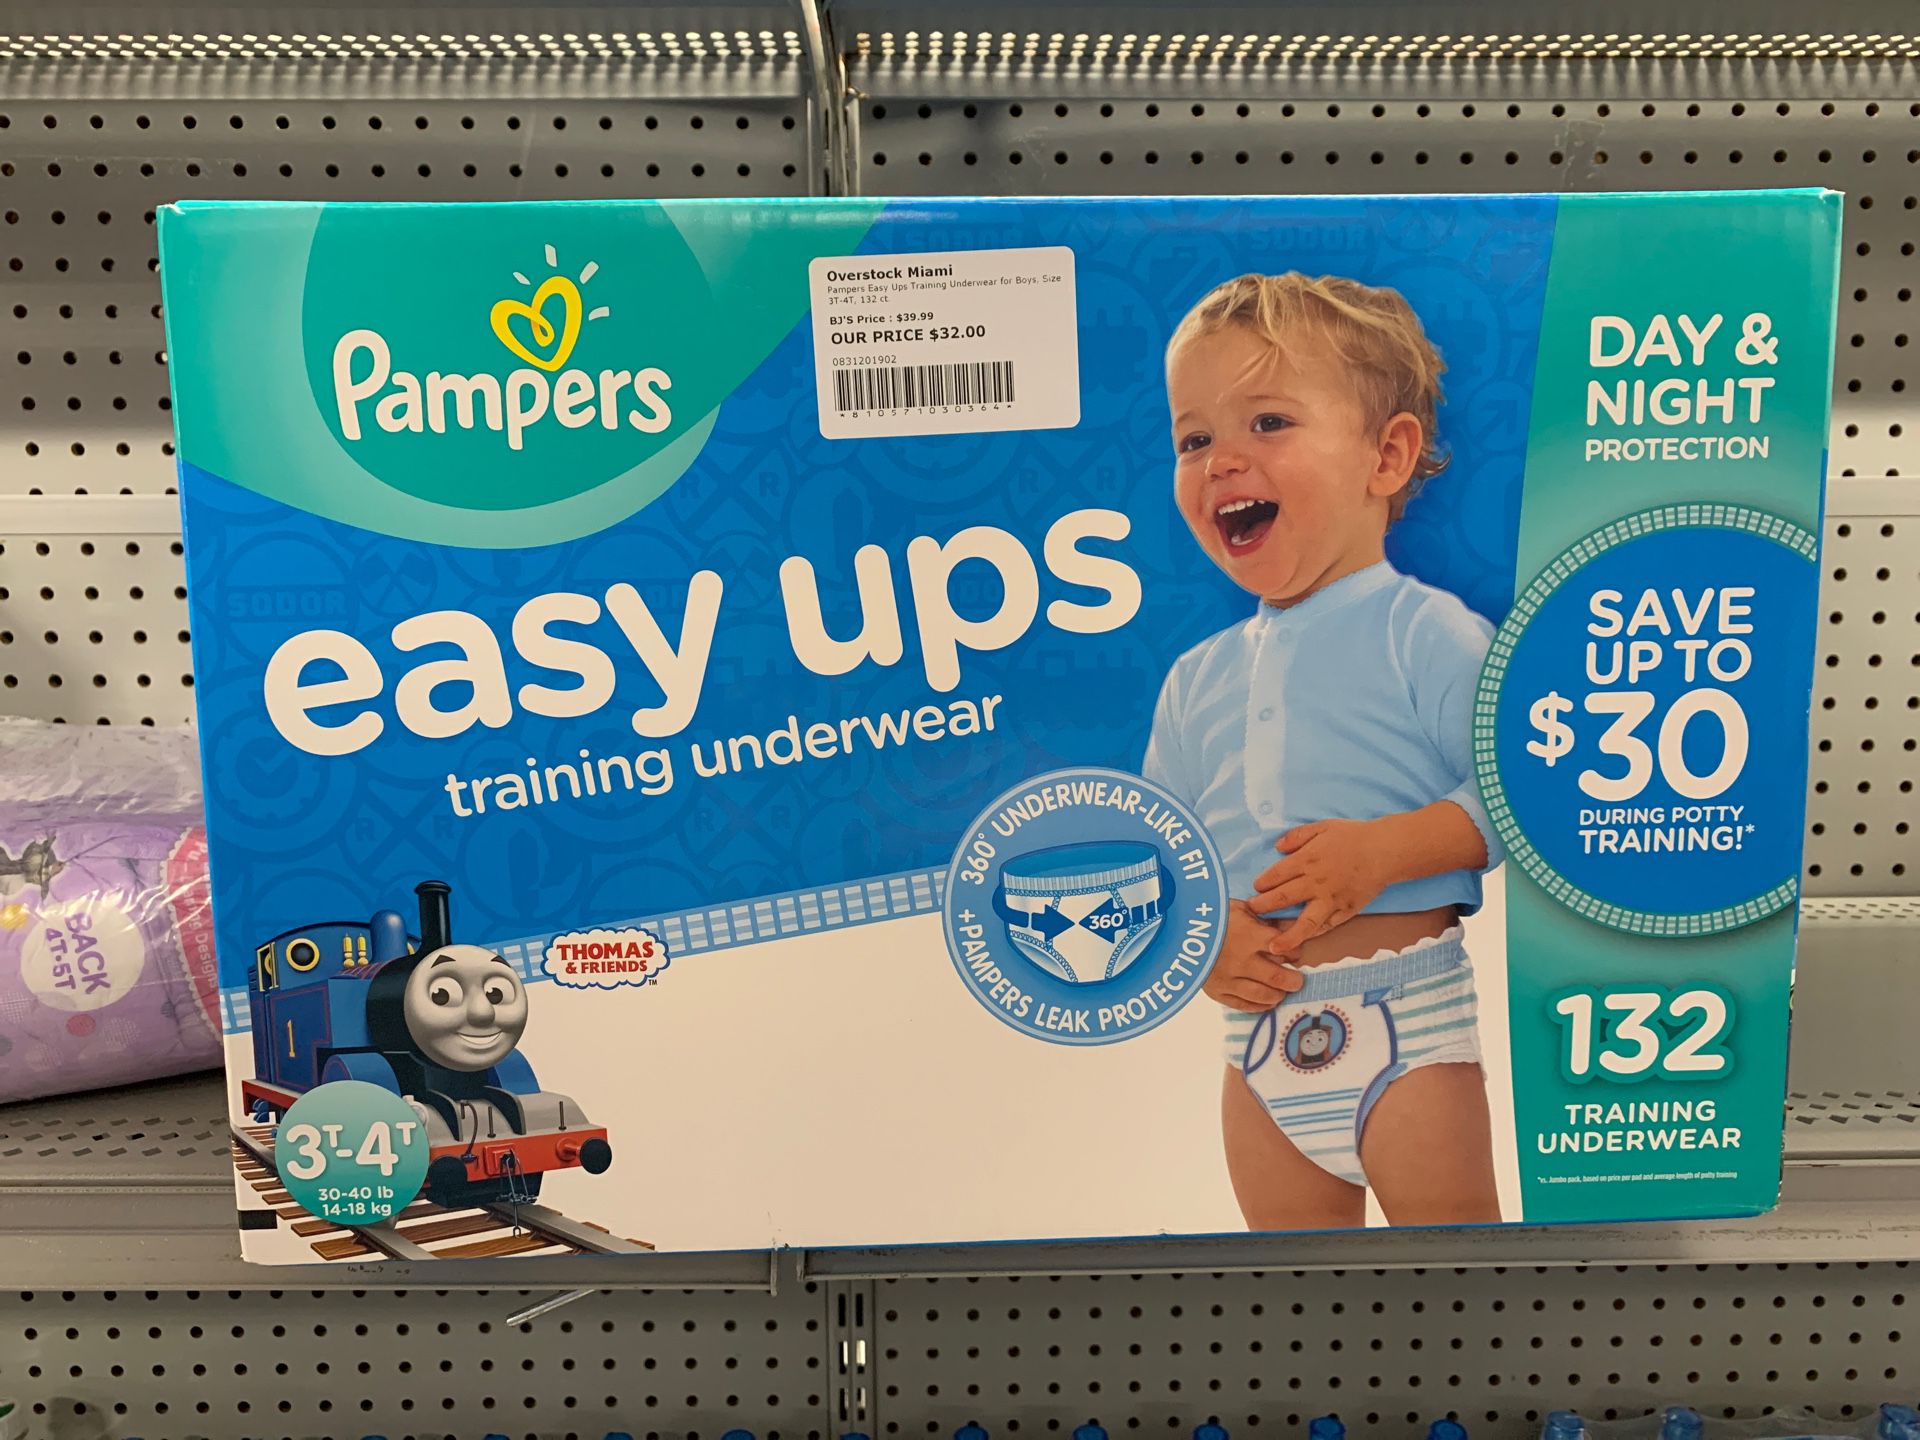 Pampers easy ups training underwear for boys size-3T-4T 132 ct